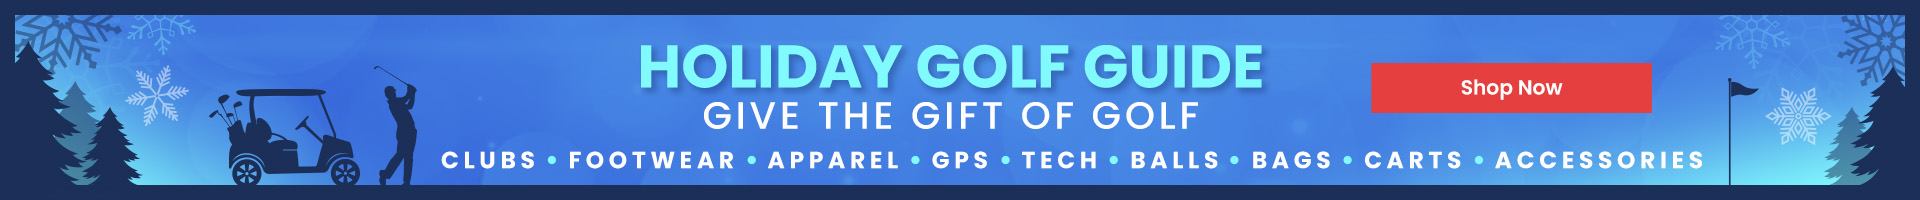 Holiday Golf Guide